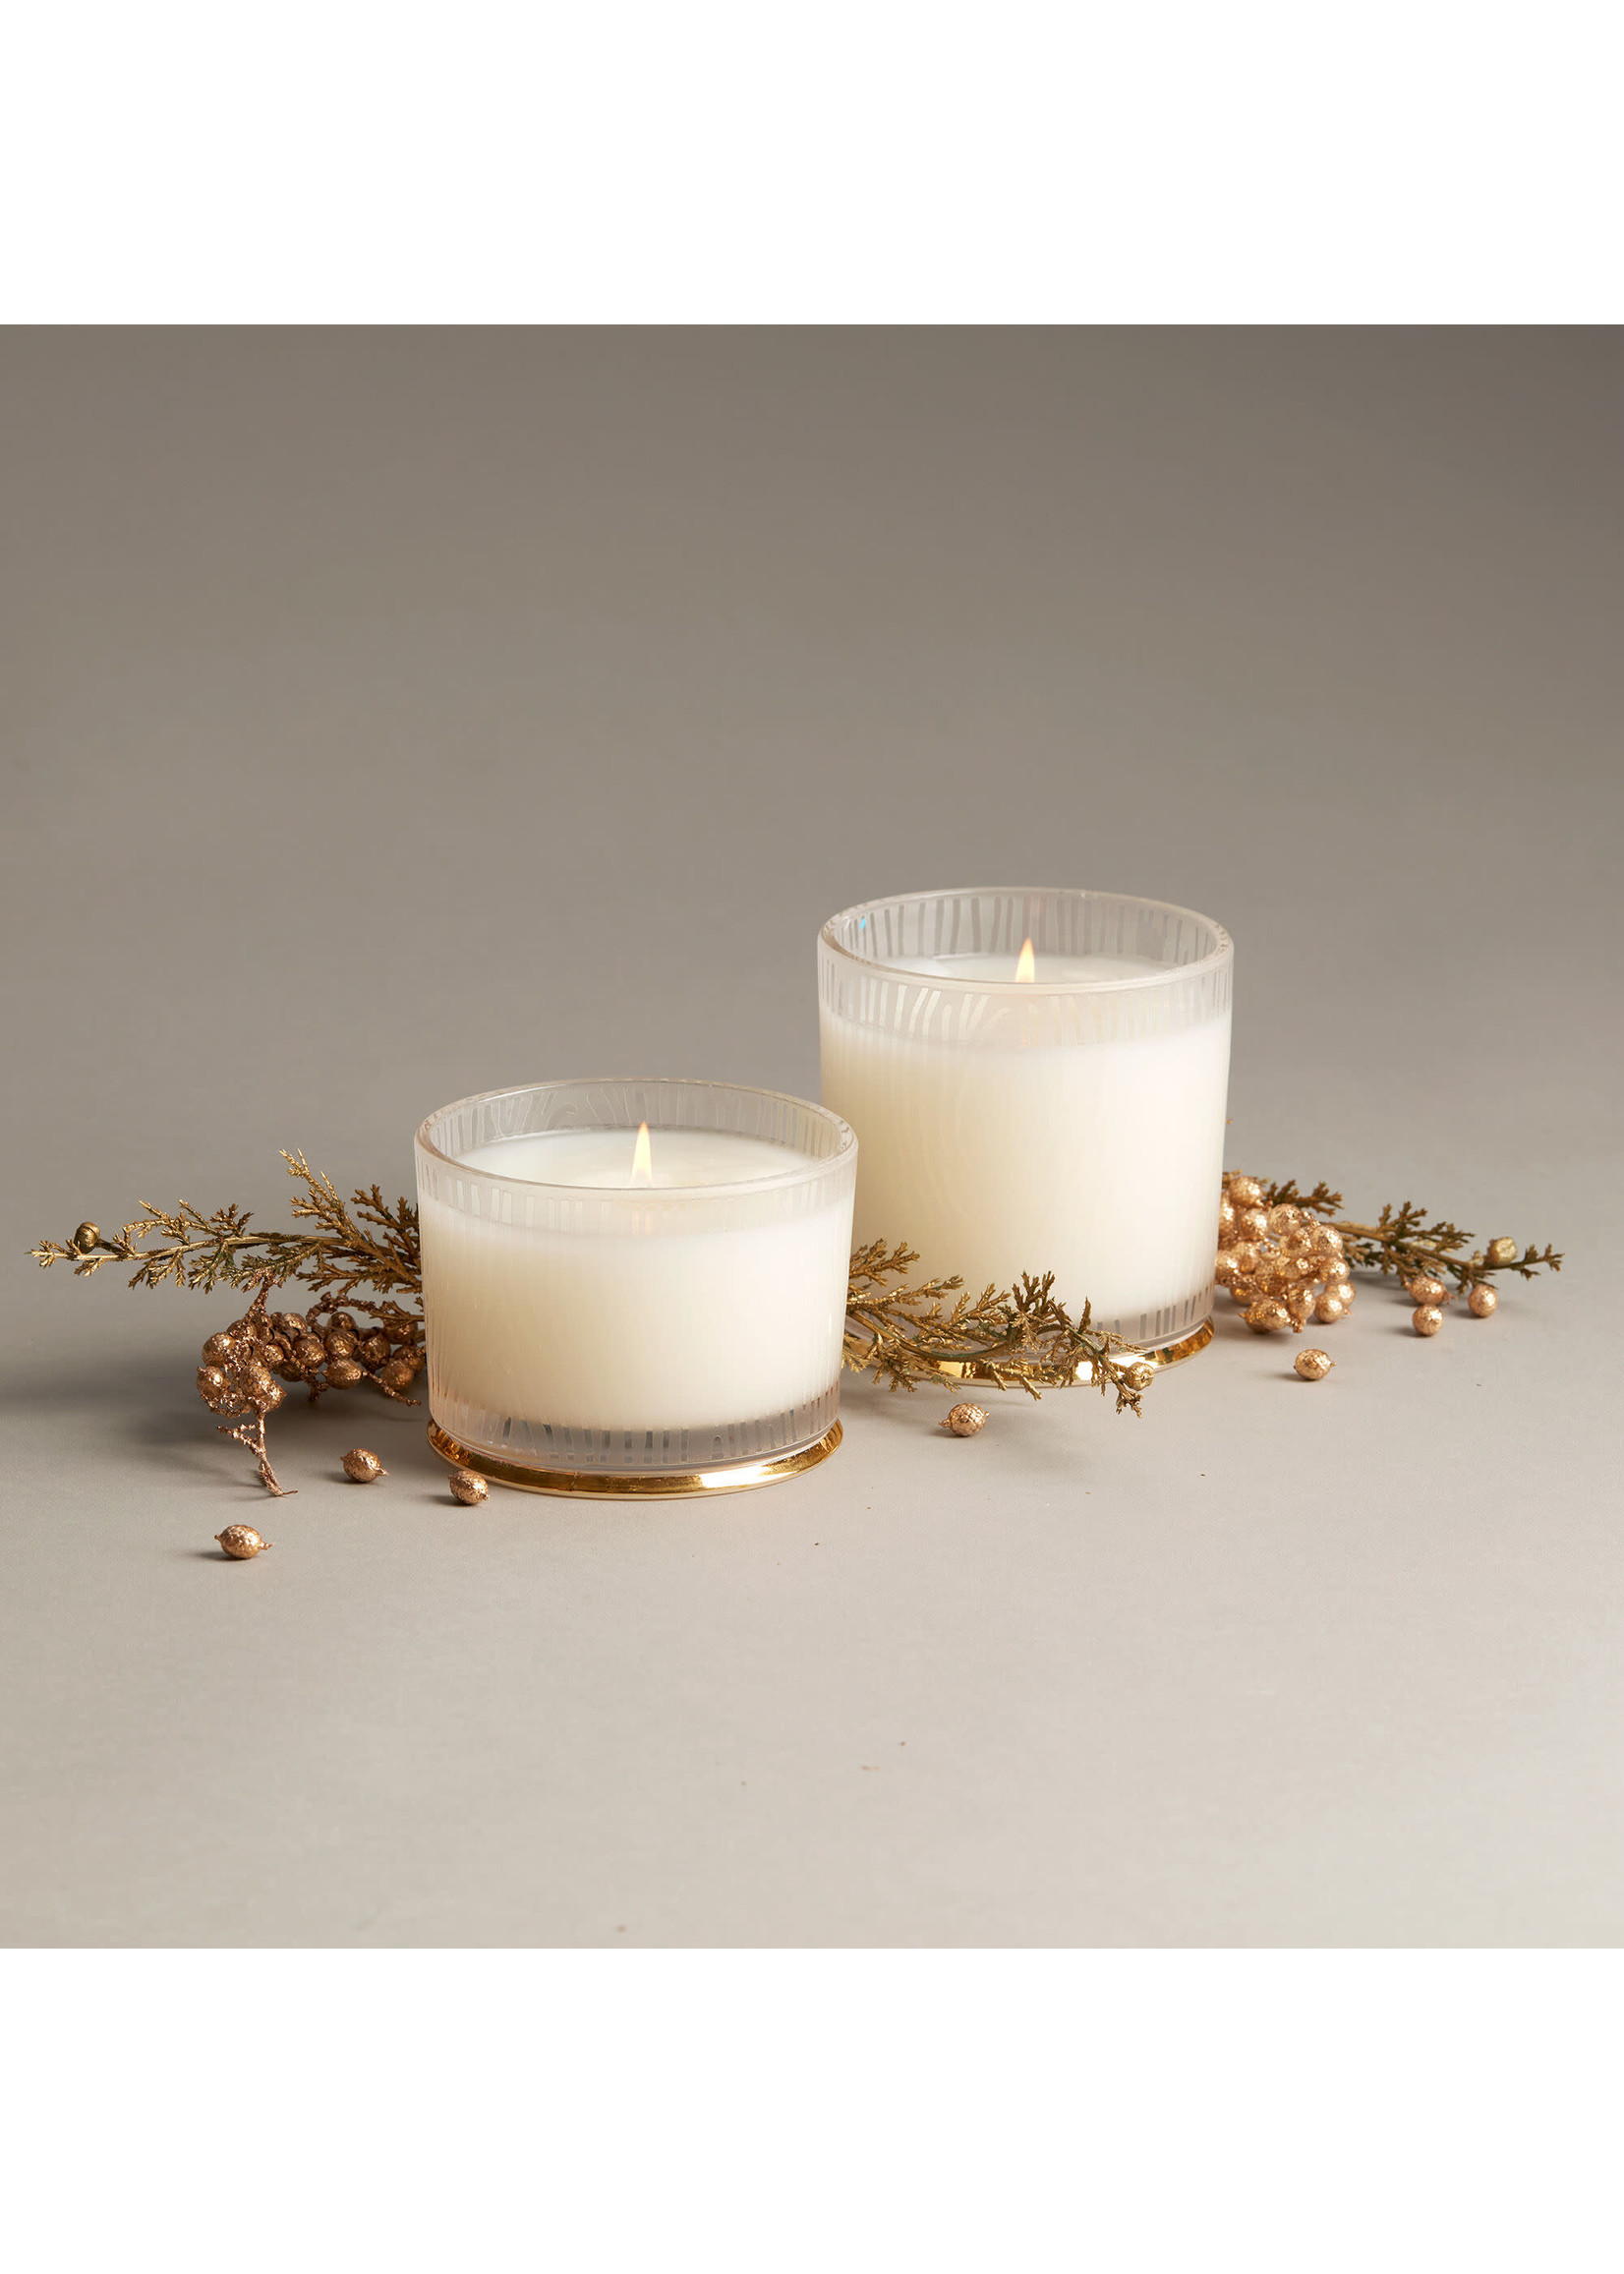 Thymes Frasier Fir Three-Wick Gold Candle